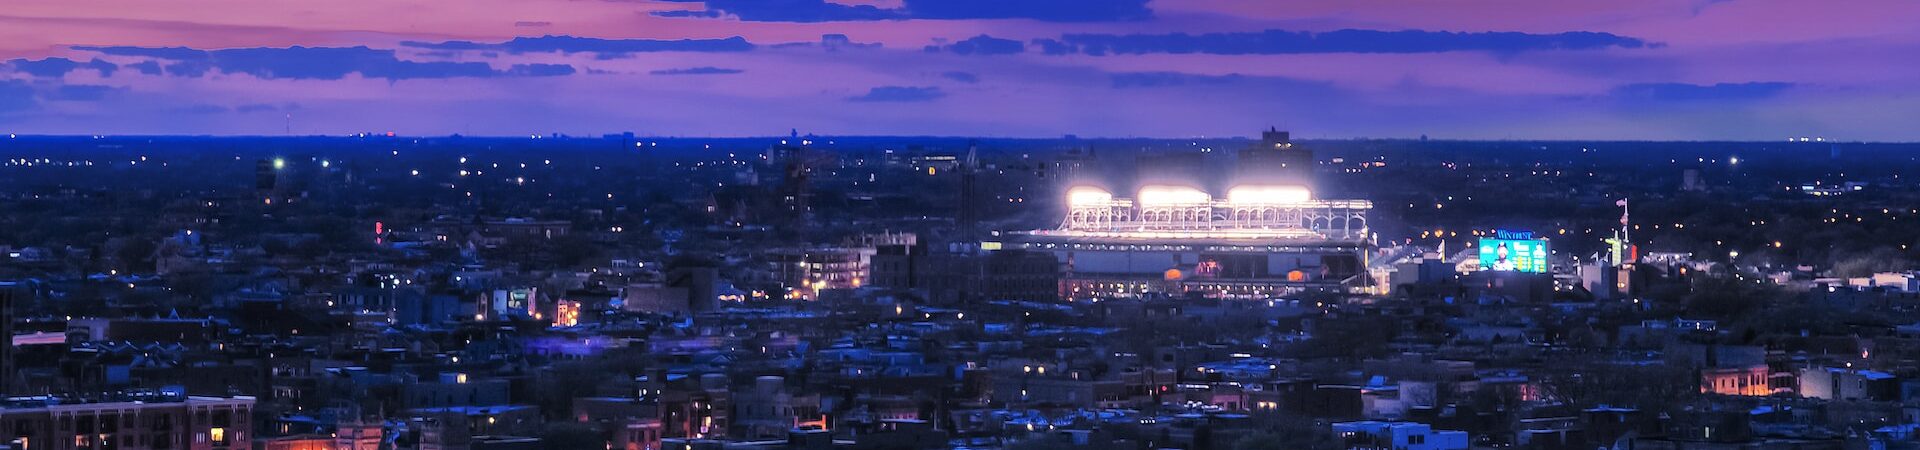 Goregous sunset view of Wrigley Field at night